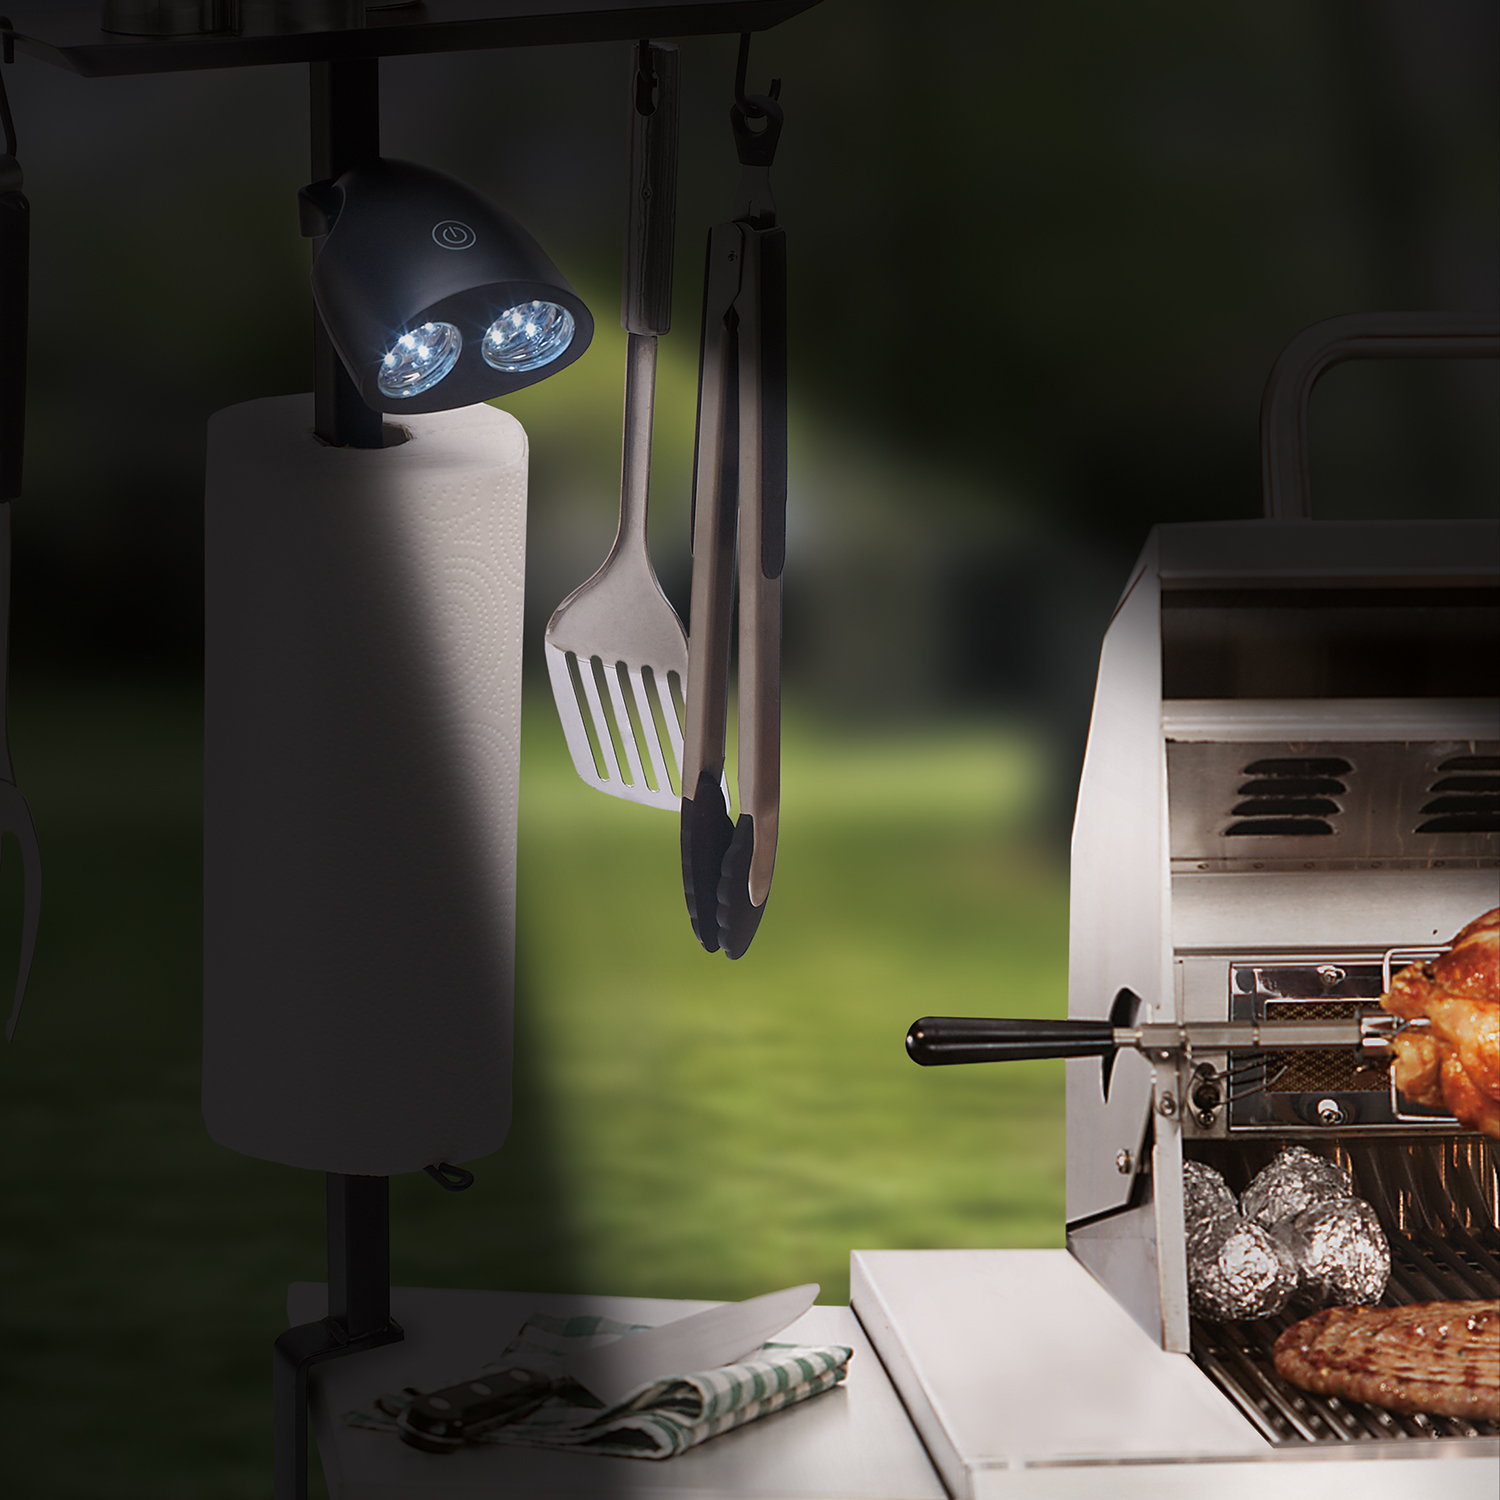 This cool grill torch is the barbecue accessory you need » Gadget Flow